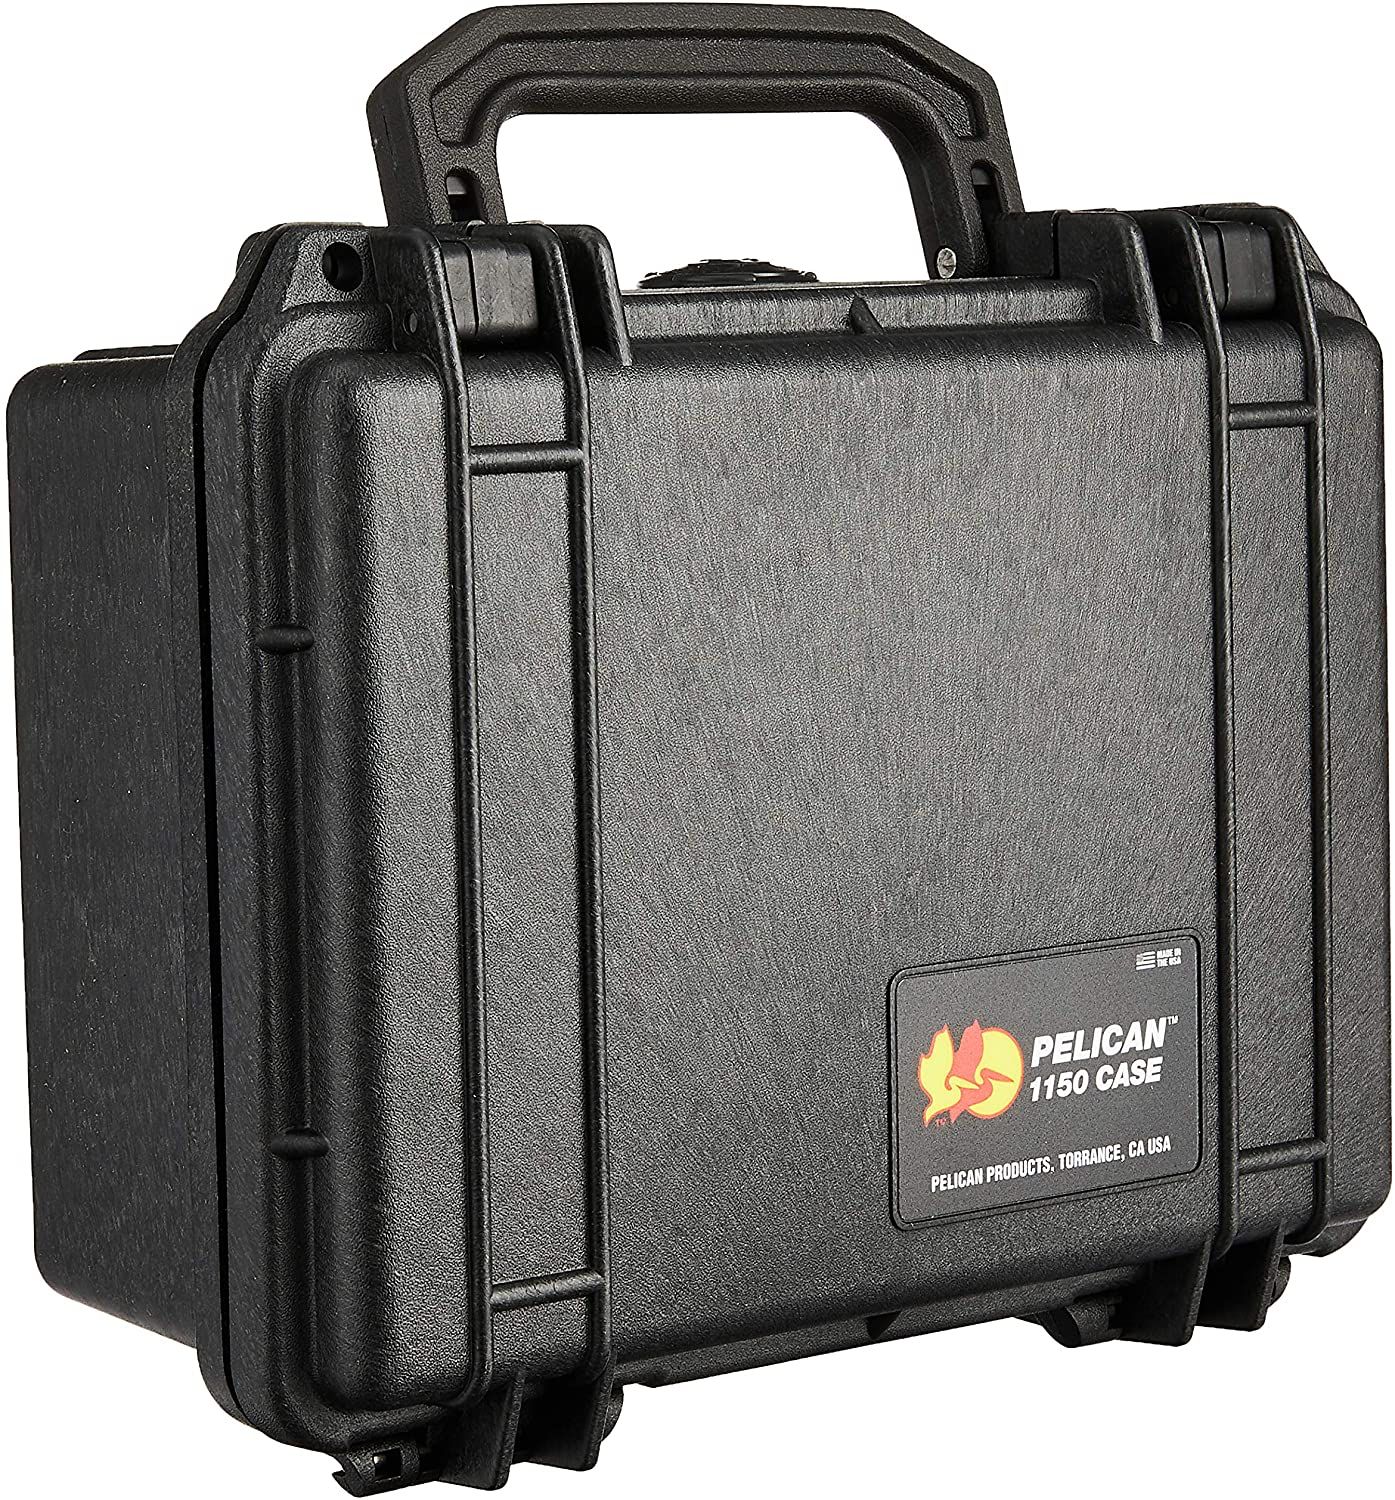 Pelican 1150 Black Protector Case with Foam - Limited Lifetime Local Warranty